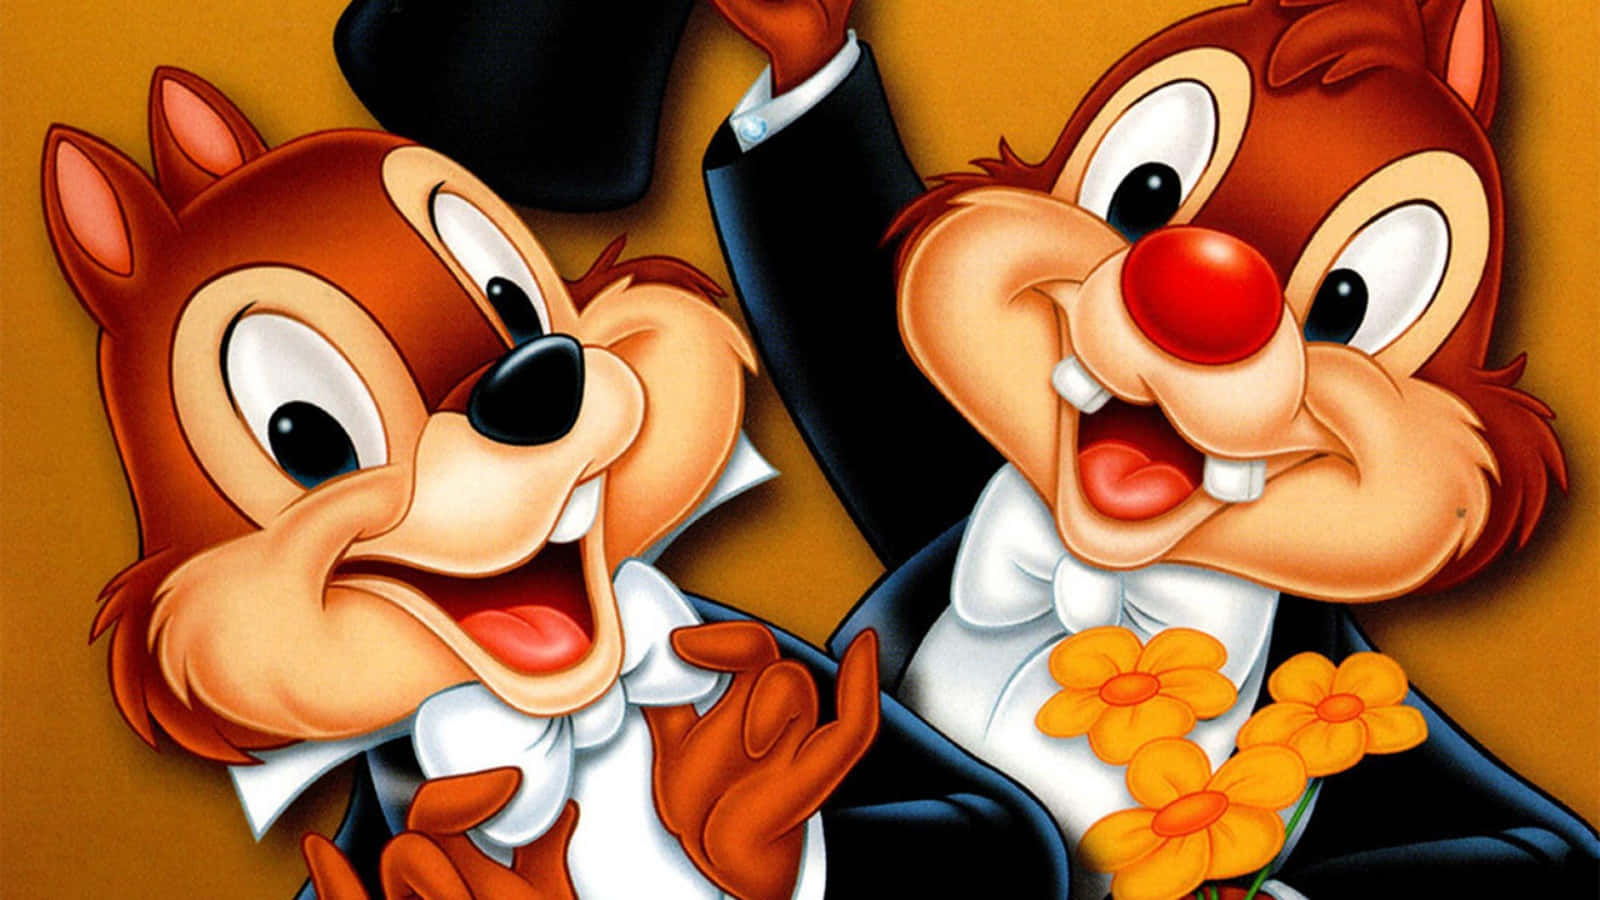 Chip and Dale, the lovable Disney cartoon characters